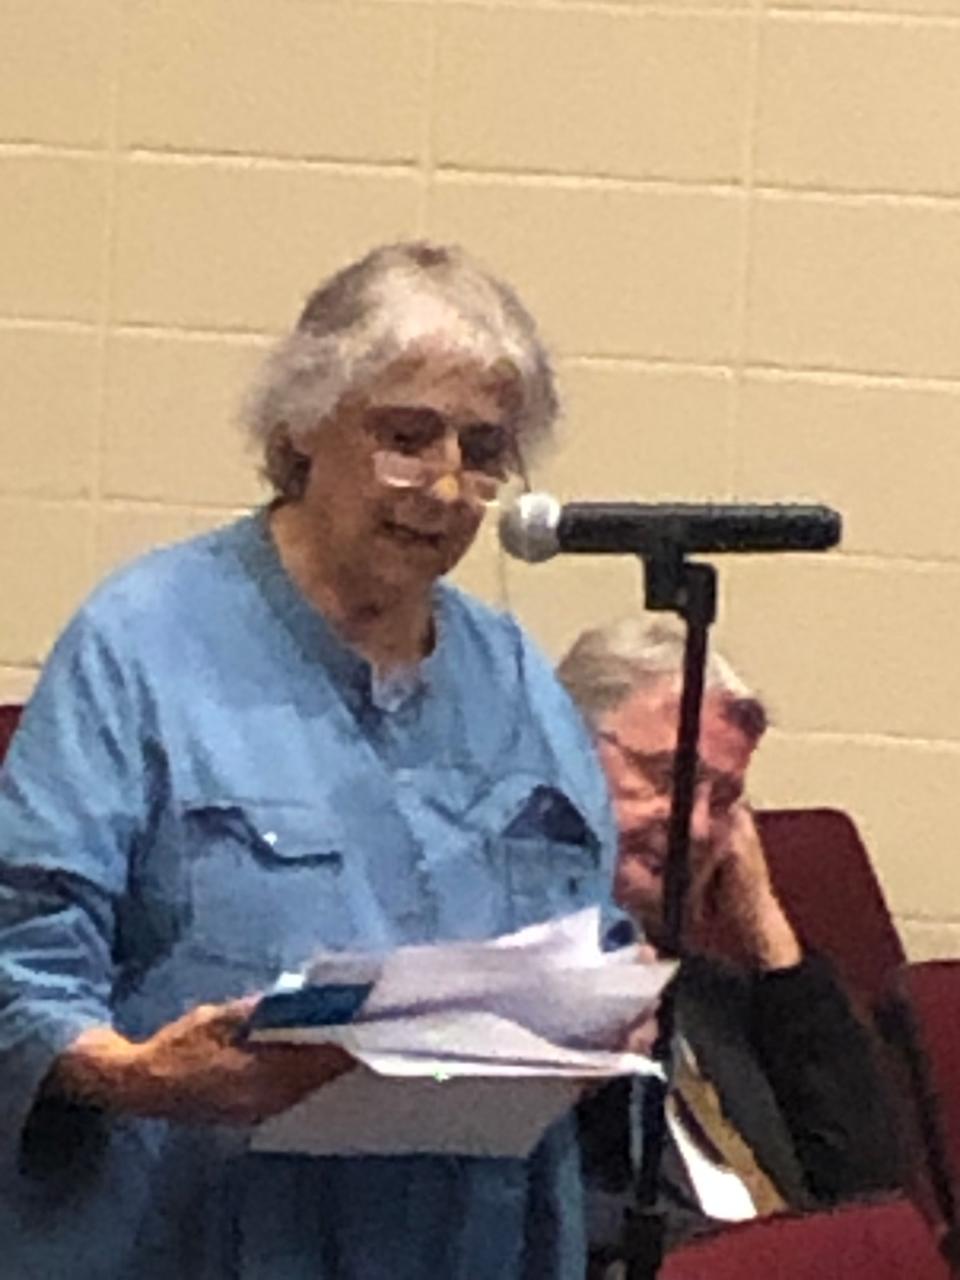 Swansea resident Geri Mullaly speaks Wednesday night at Swansea's Municipal Complex Project information session held at the Joseph Case High School auditorium.